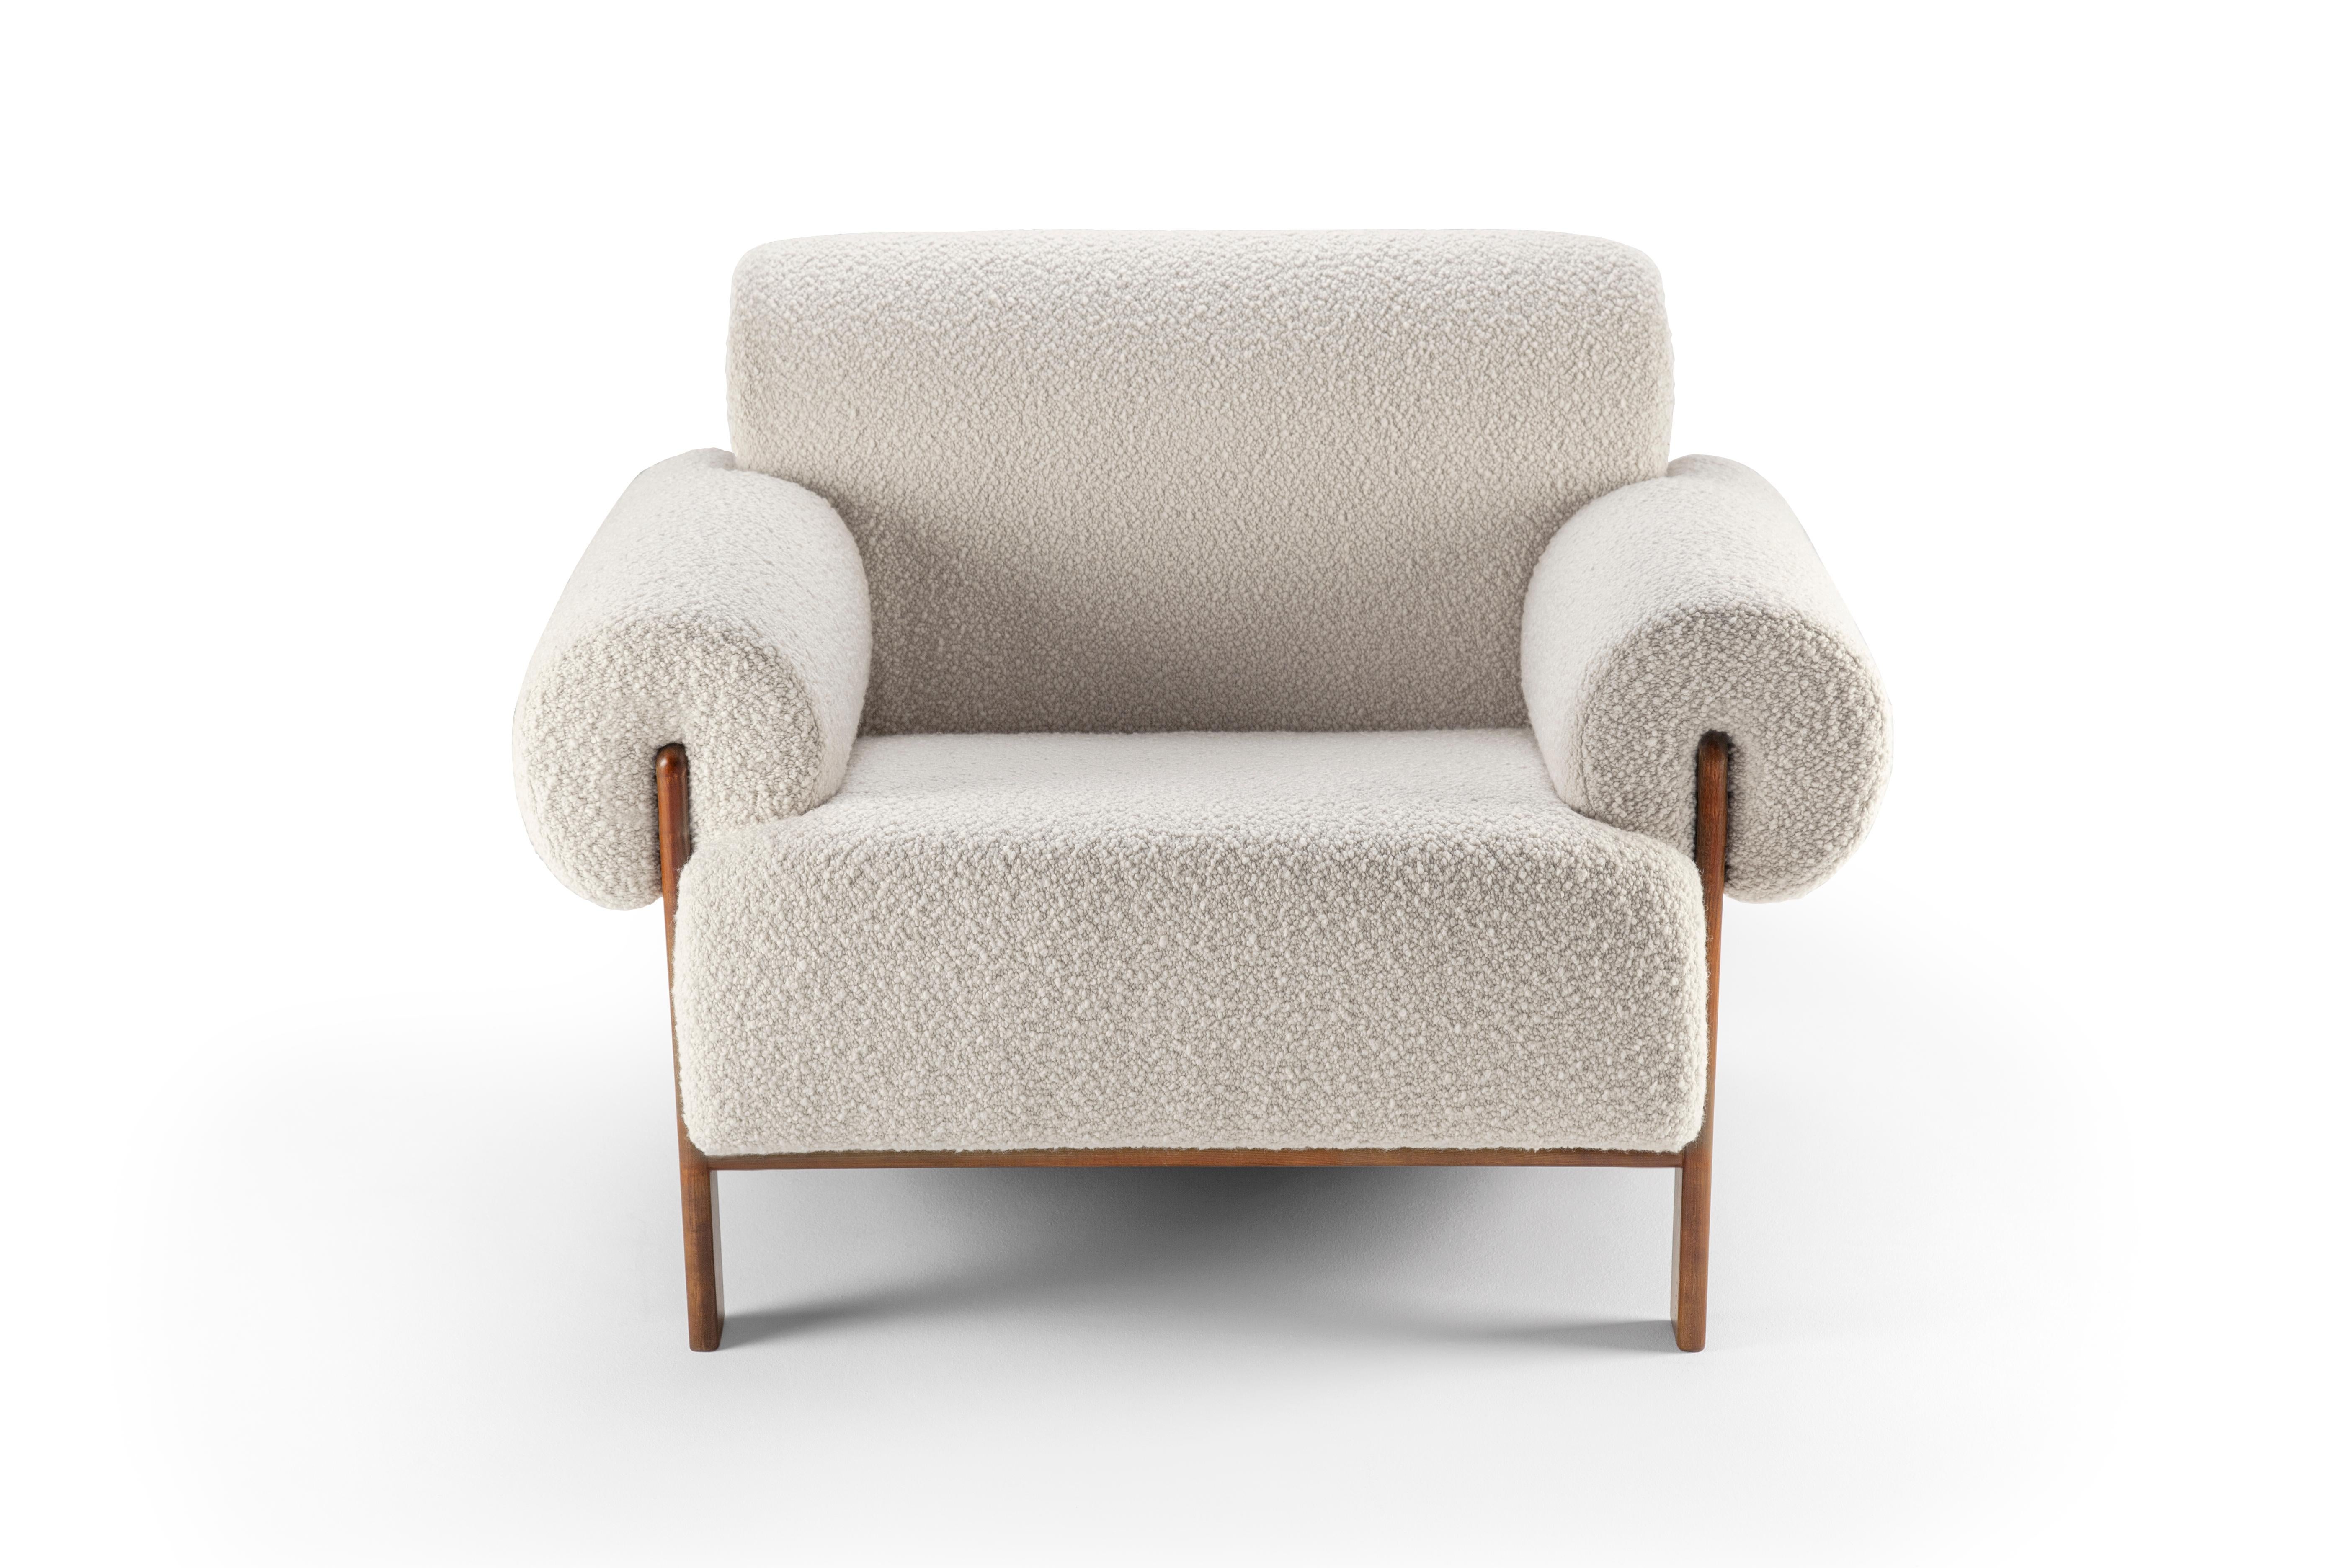 Underpinned by a minimalist and sophistication aesthetic of clean lines.

Paloma Armchair designed by Bernhardt & Vella.

DIMENSIONS
W 95CM  37.5”
D 85CM  33.5”
H 72CM 28”
SH 40 cm  15,7”

PRODUCT FEATURES
Structure in Solid Walnut wood. Upholstered